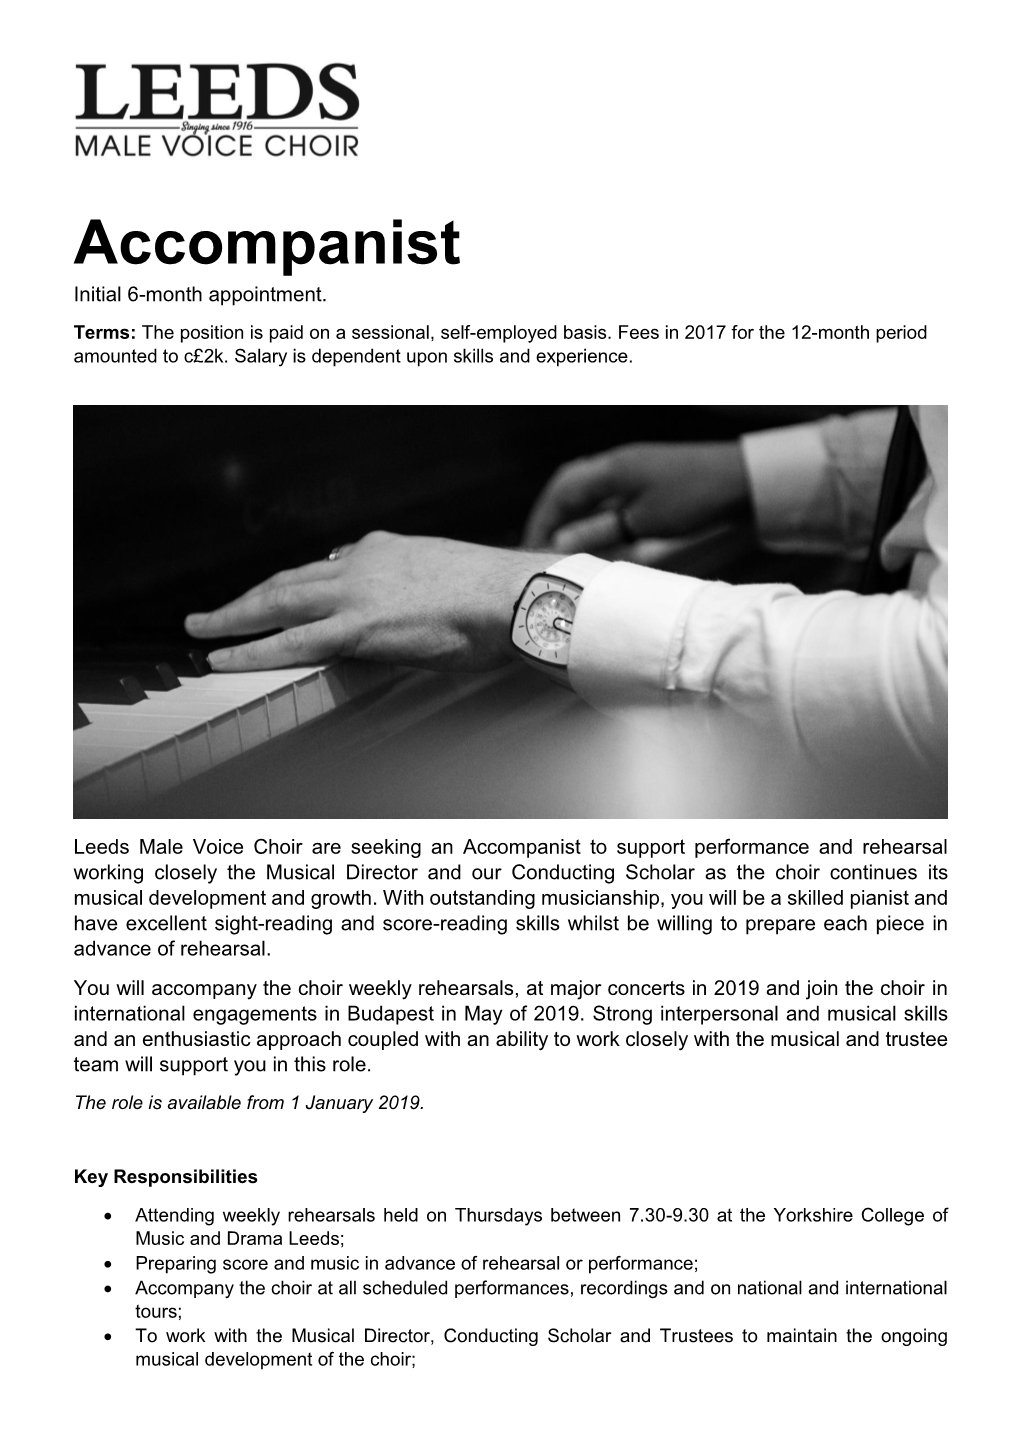 Accompanist Initial 6-Month Appointment